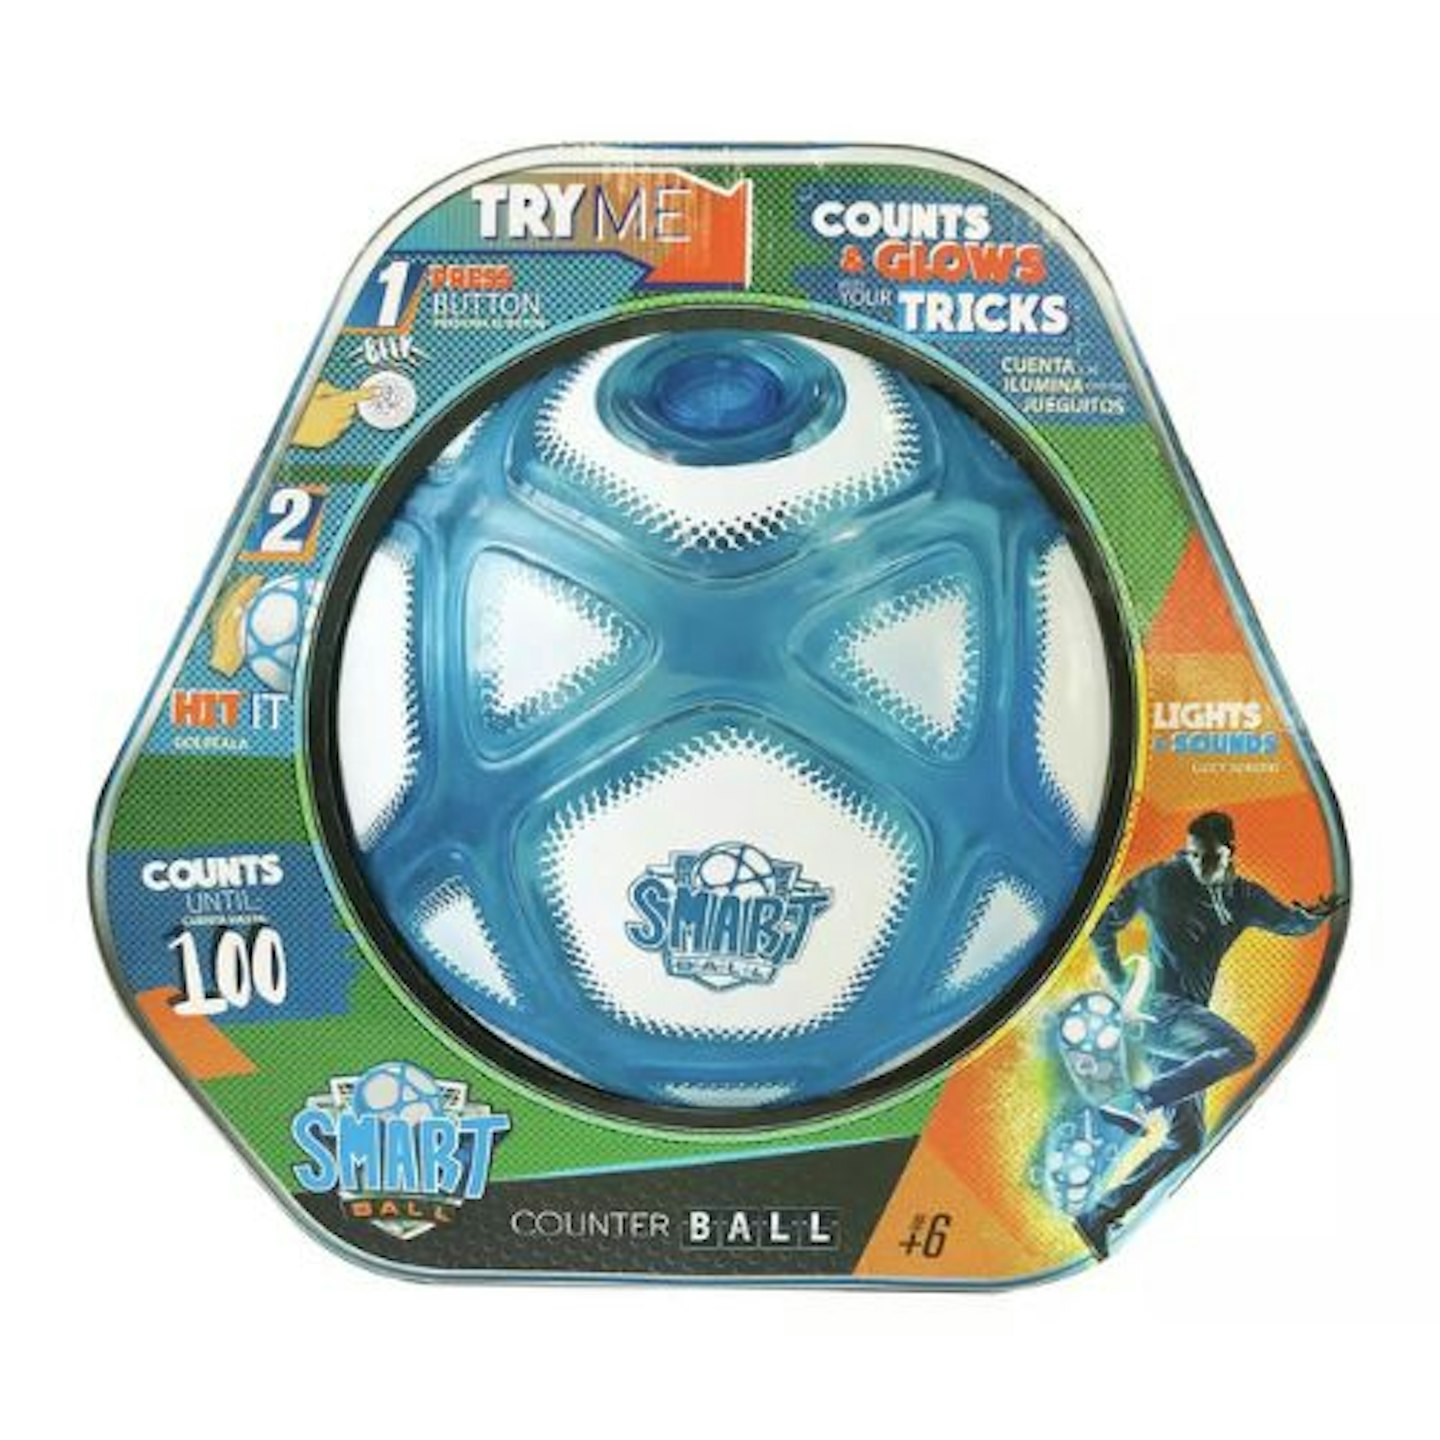 Best toys for 5 year olds Smart Ball Kick Up Counting Football with Lights and Sounds